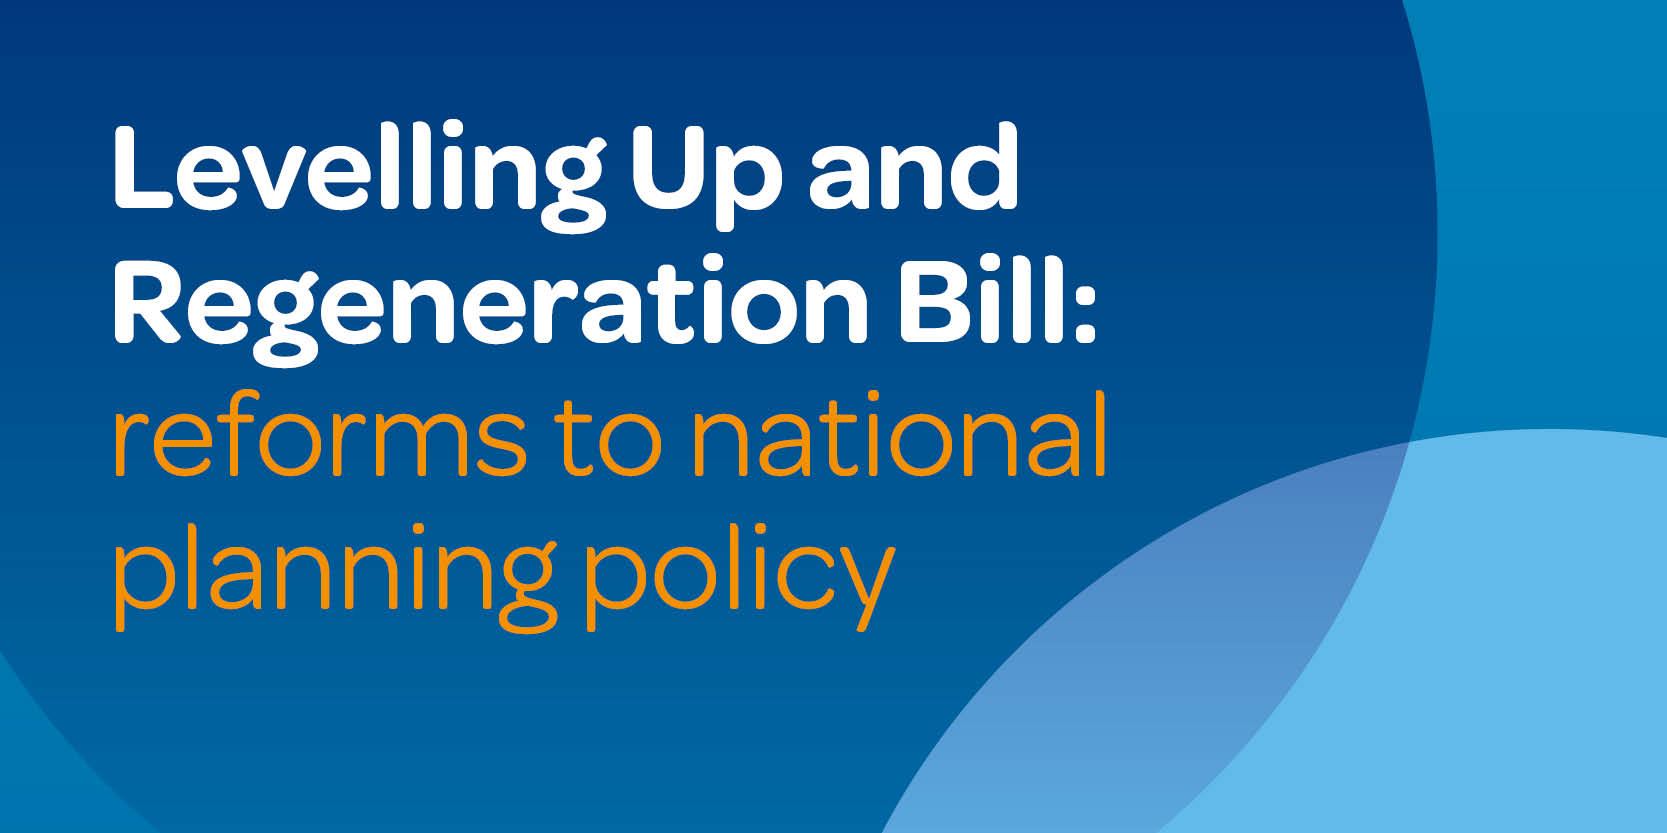 NPPF Levelling Up and Regeneration Bill